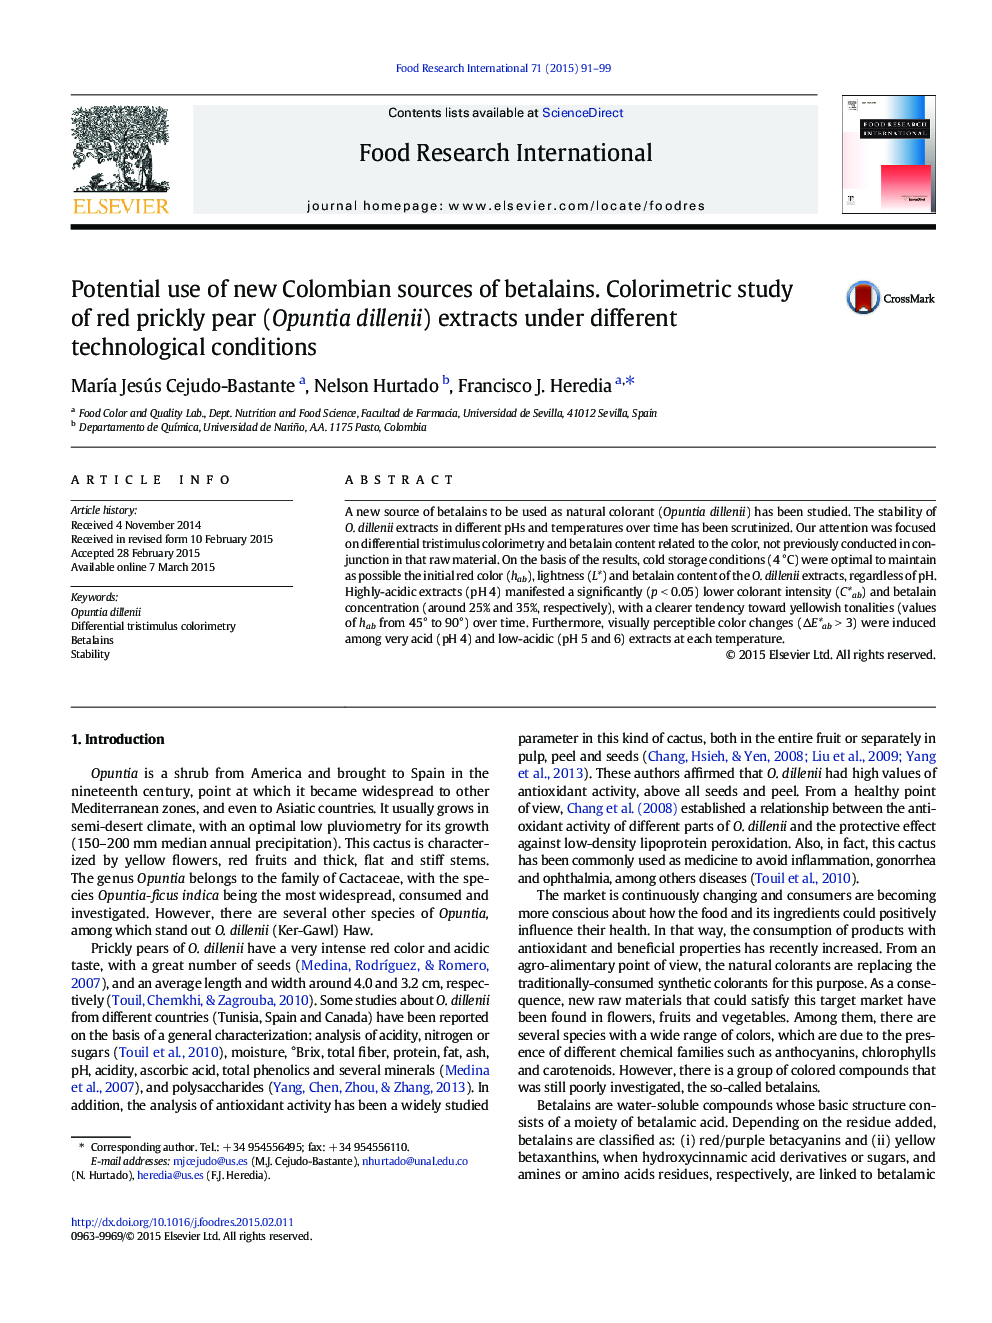 Potential use of new Colombian sources of betalains. Colorimetric study of red prickly pear (Opuntia dillenii) extracts under different technological conditions